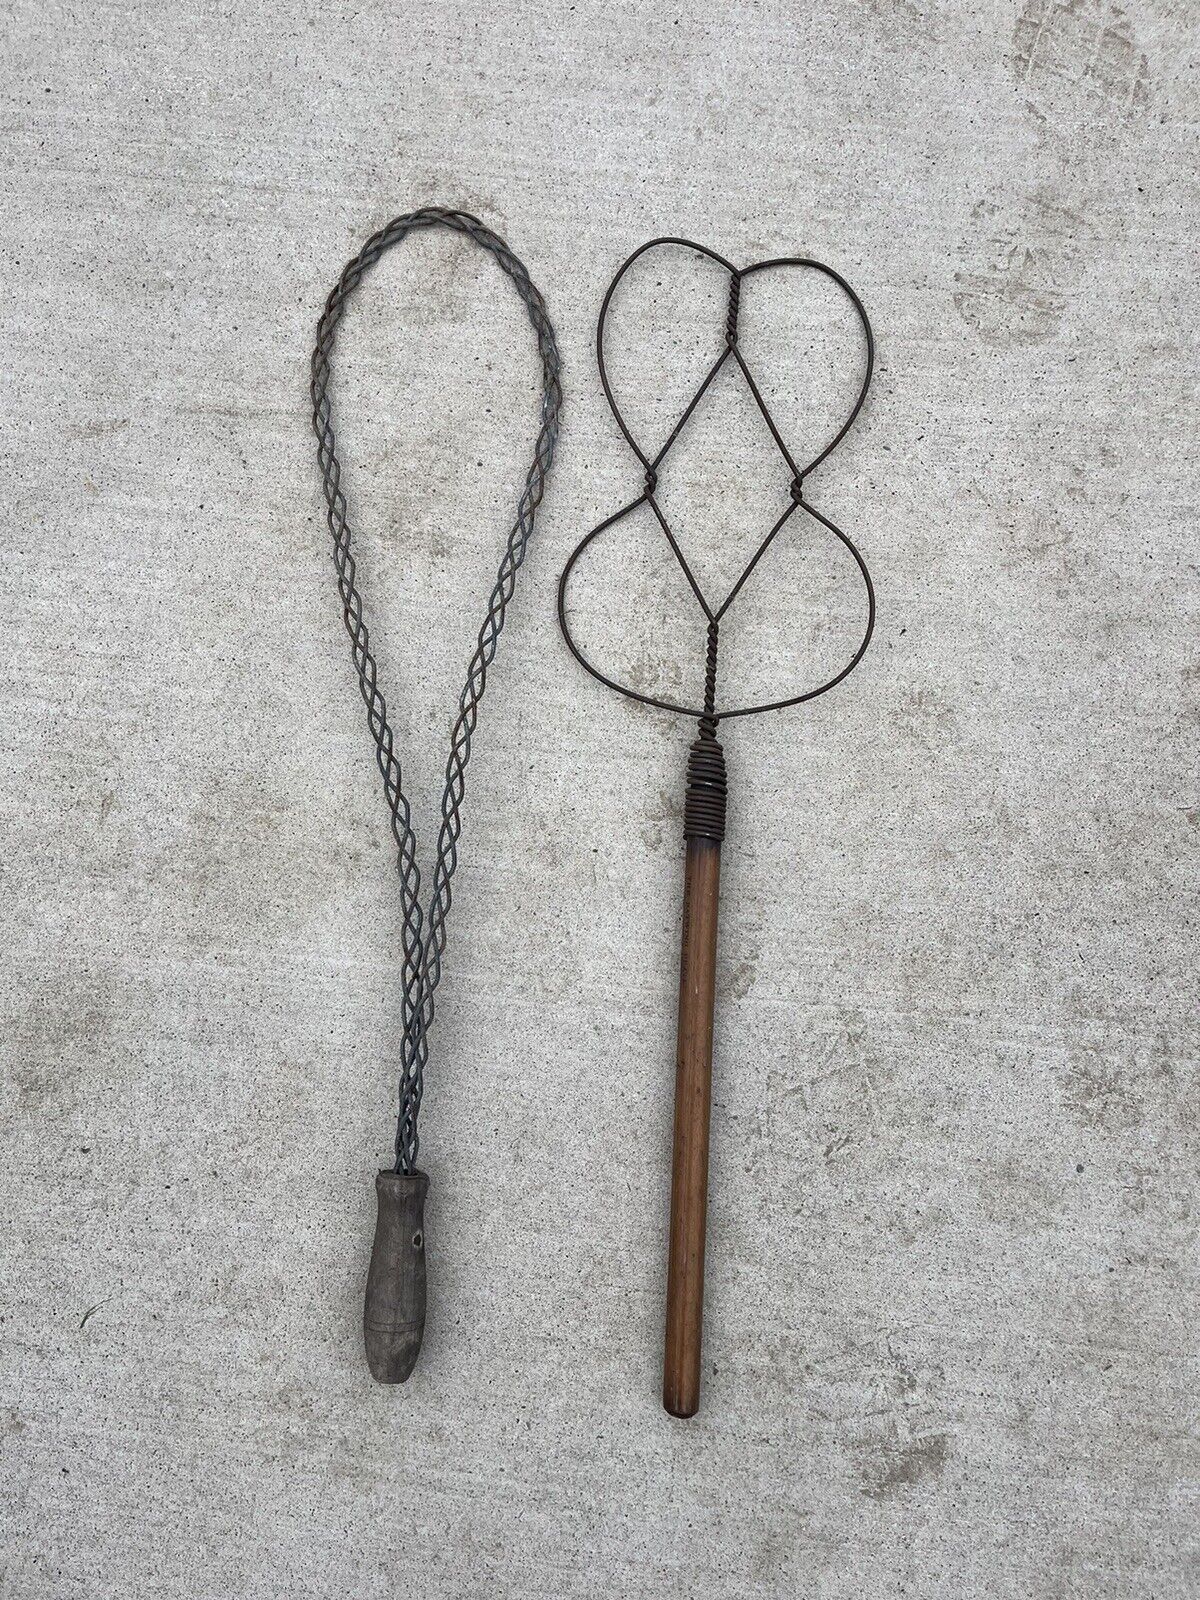 Vintage Wire Rug Beater Wood Handle Heart Shaped Rustic Farm Country Decor